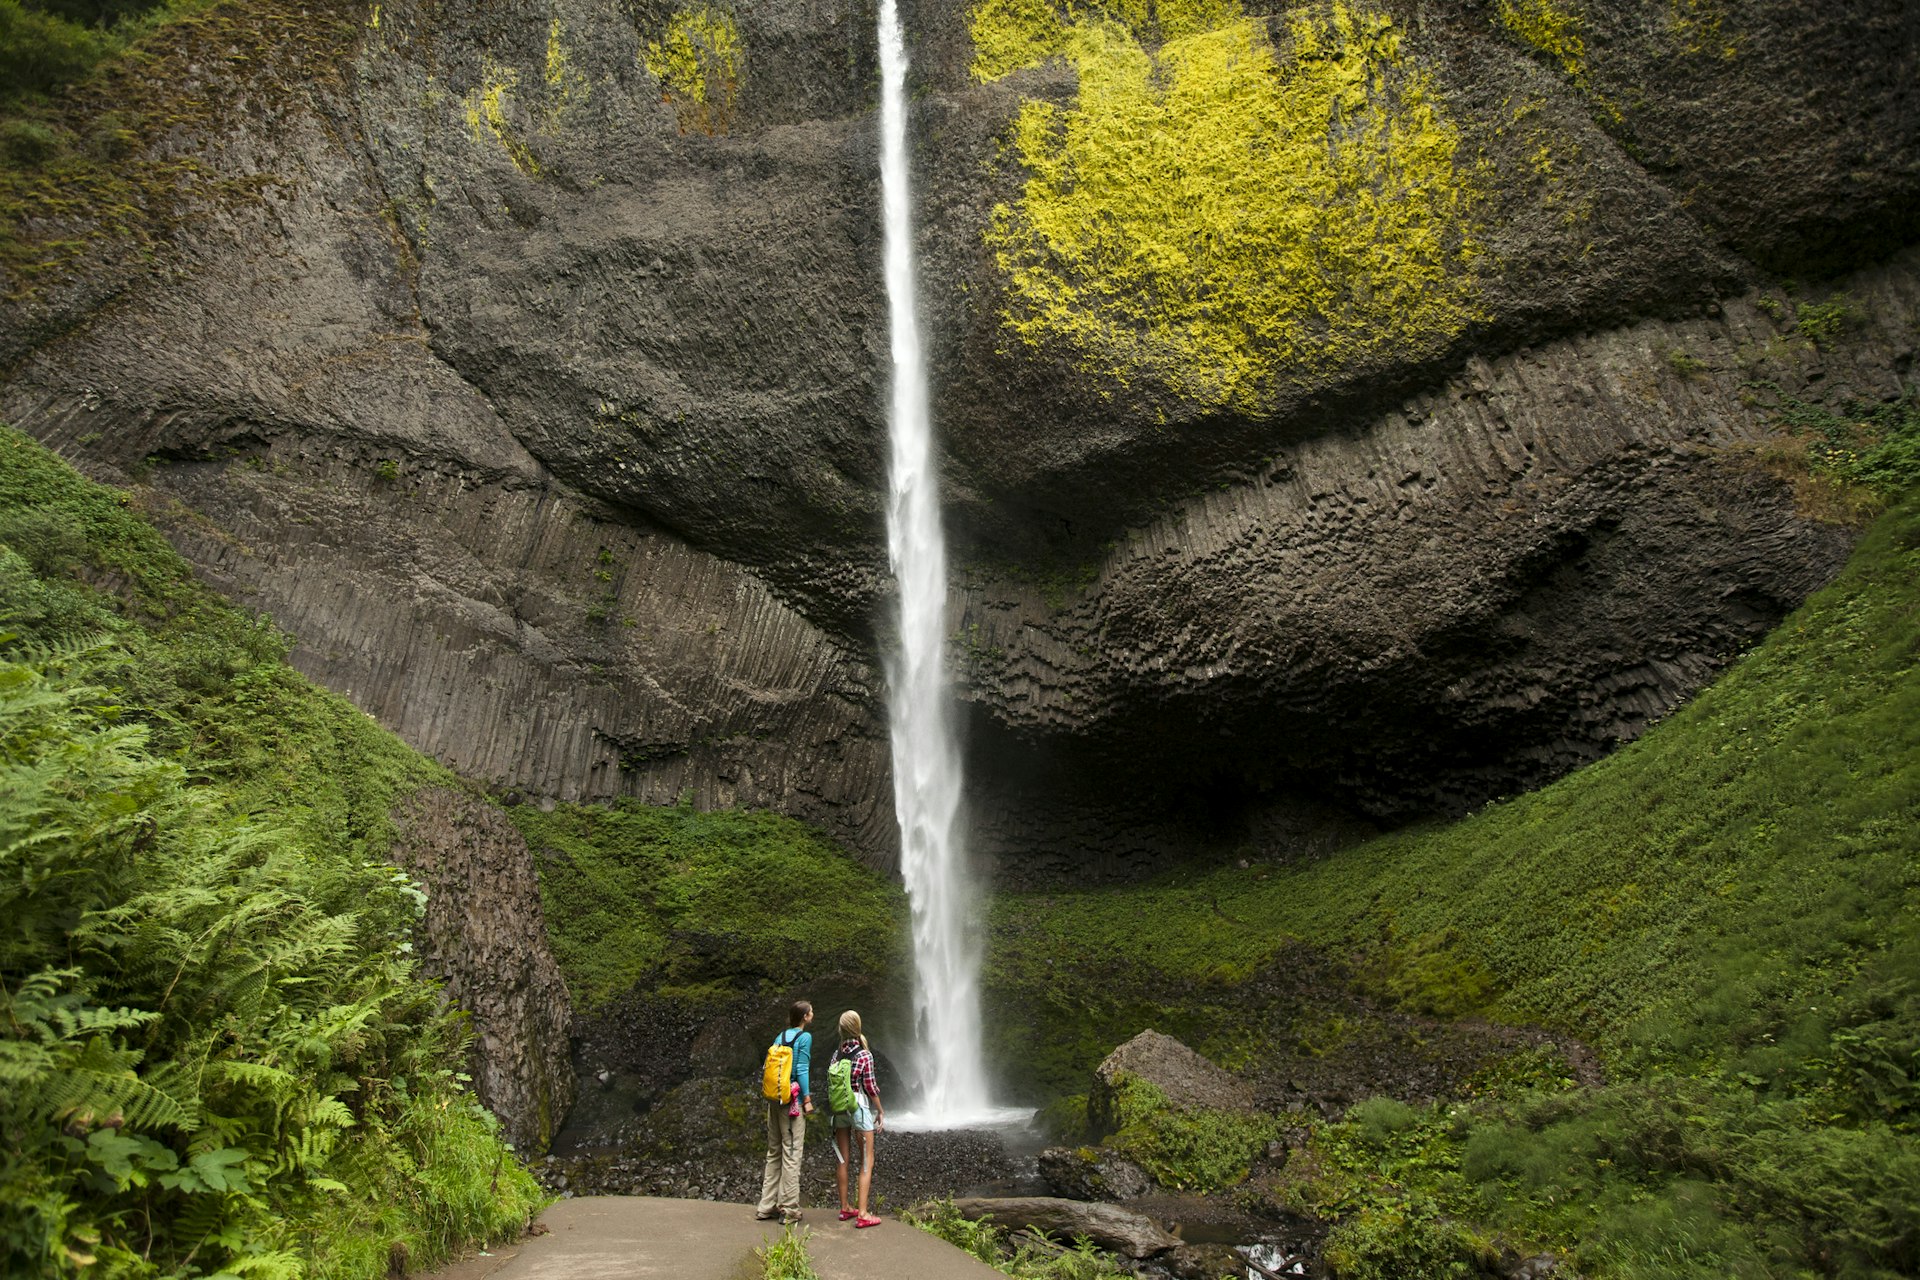 Two hikers stand at the base of a waterfall looking upwards